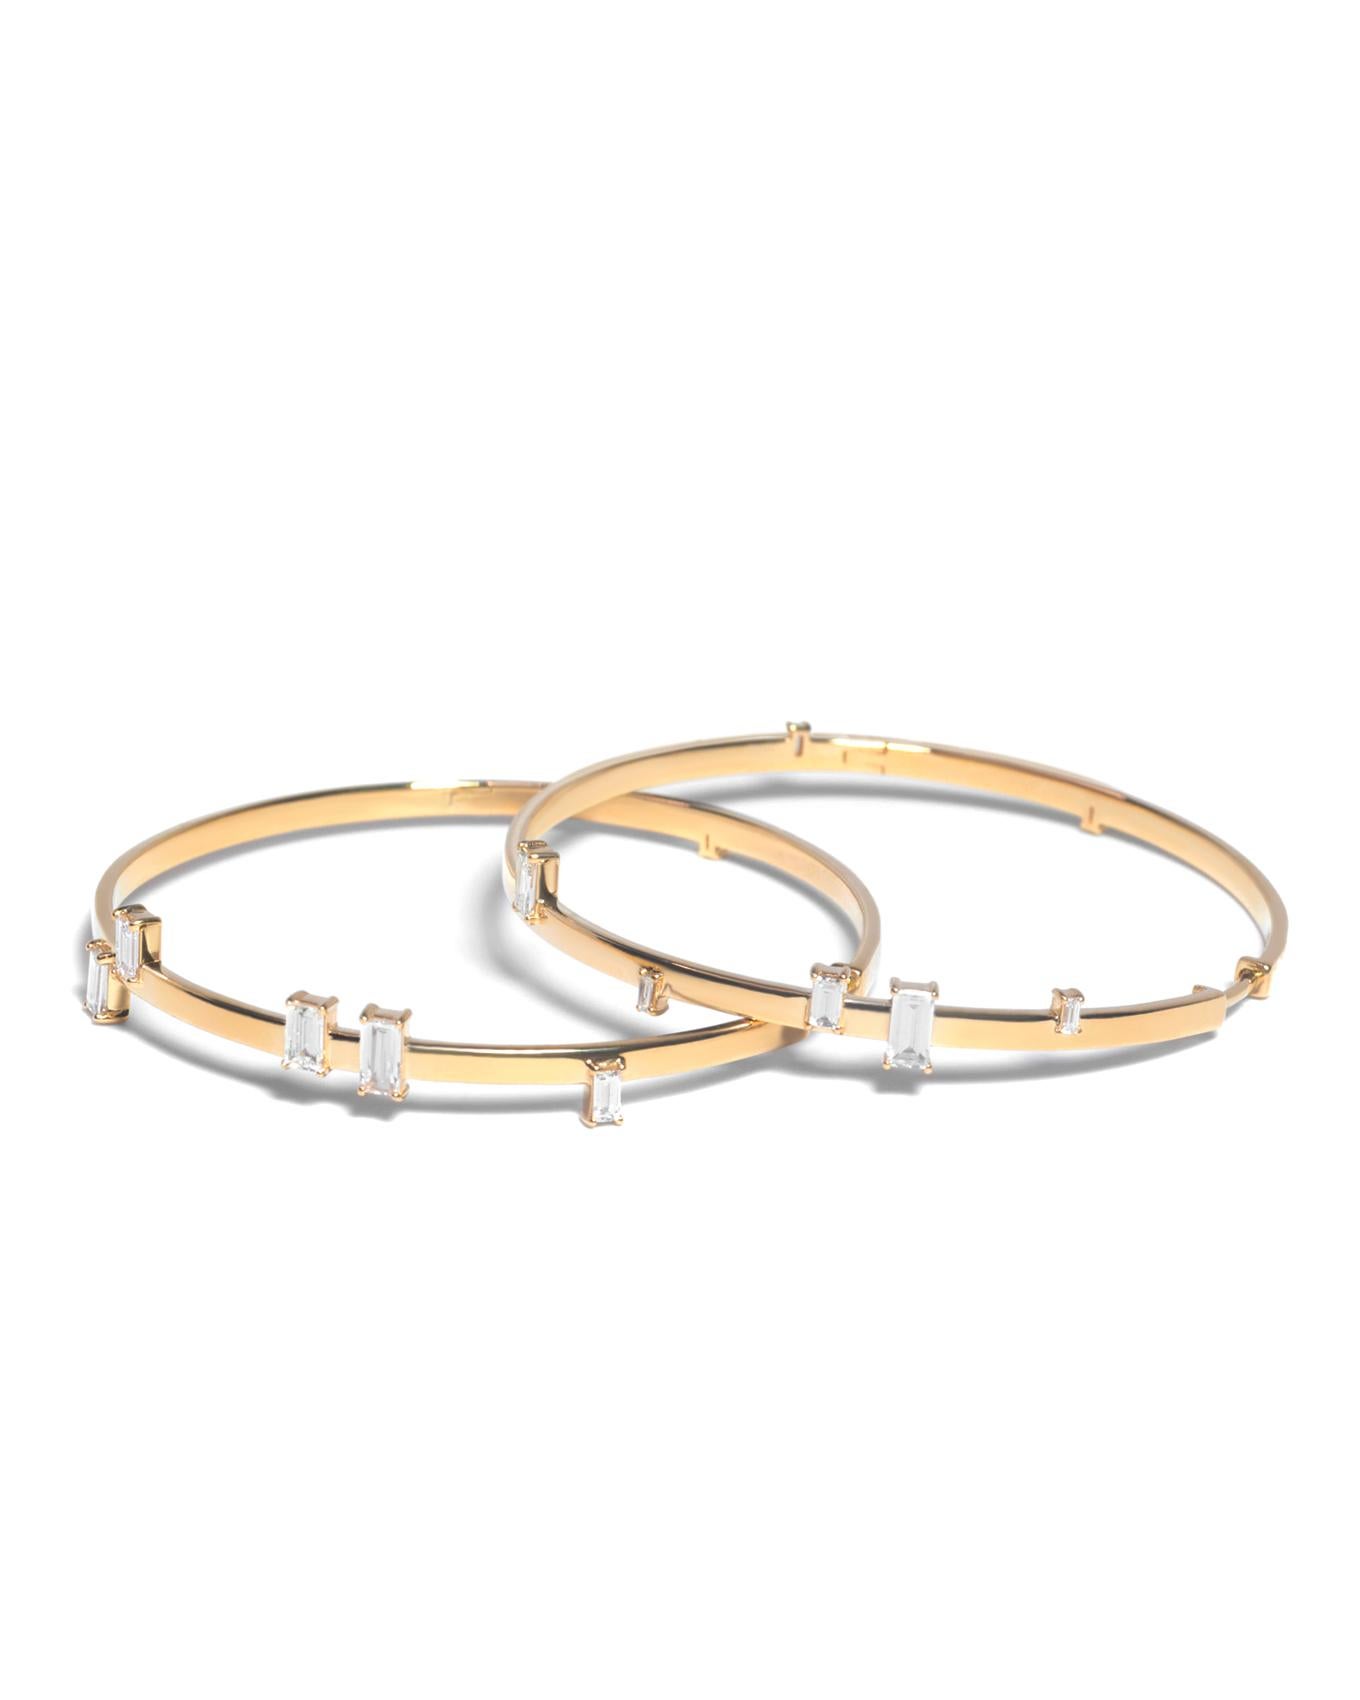 Contemporary Small Baguette Hoop Earrings 18K Yellow Gold .62 Carat White Diamonds SI1 For Sale